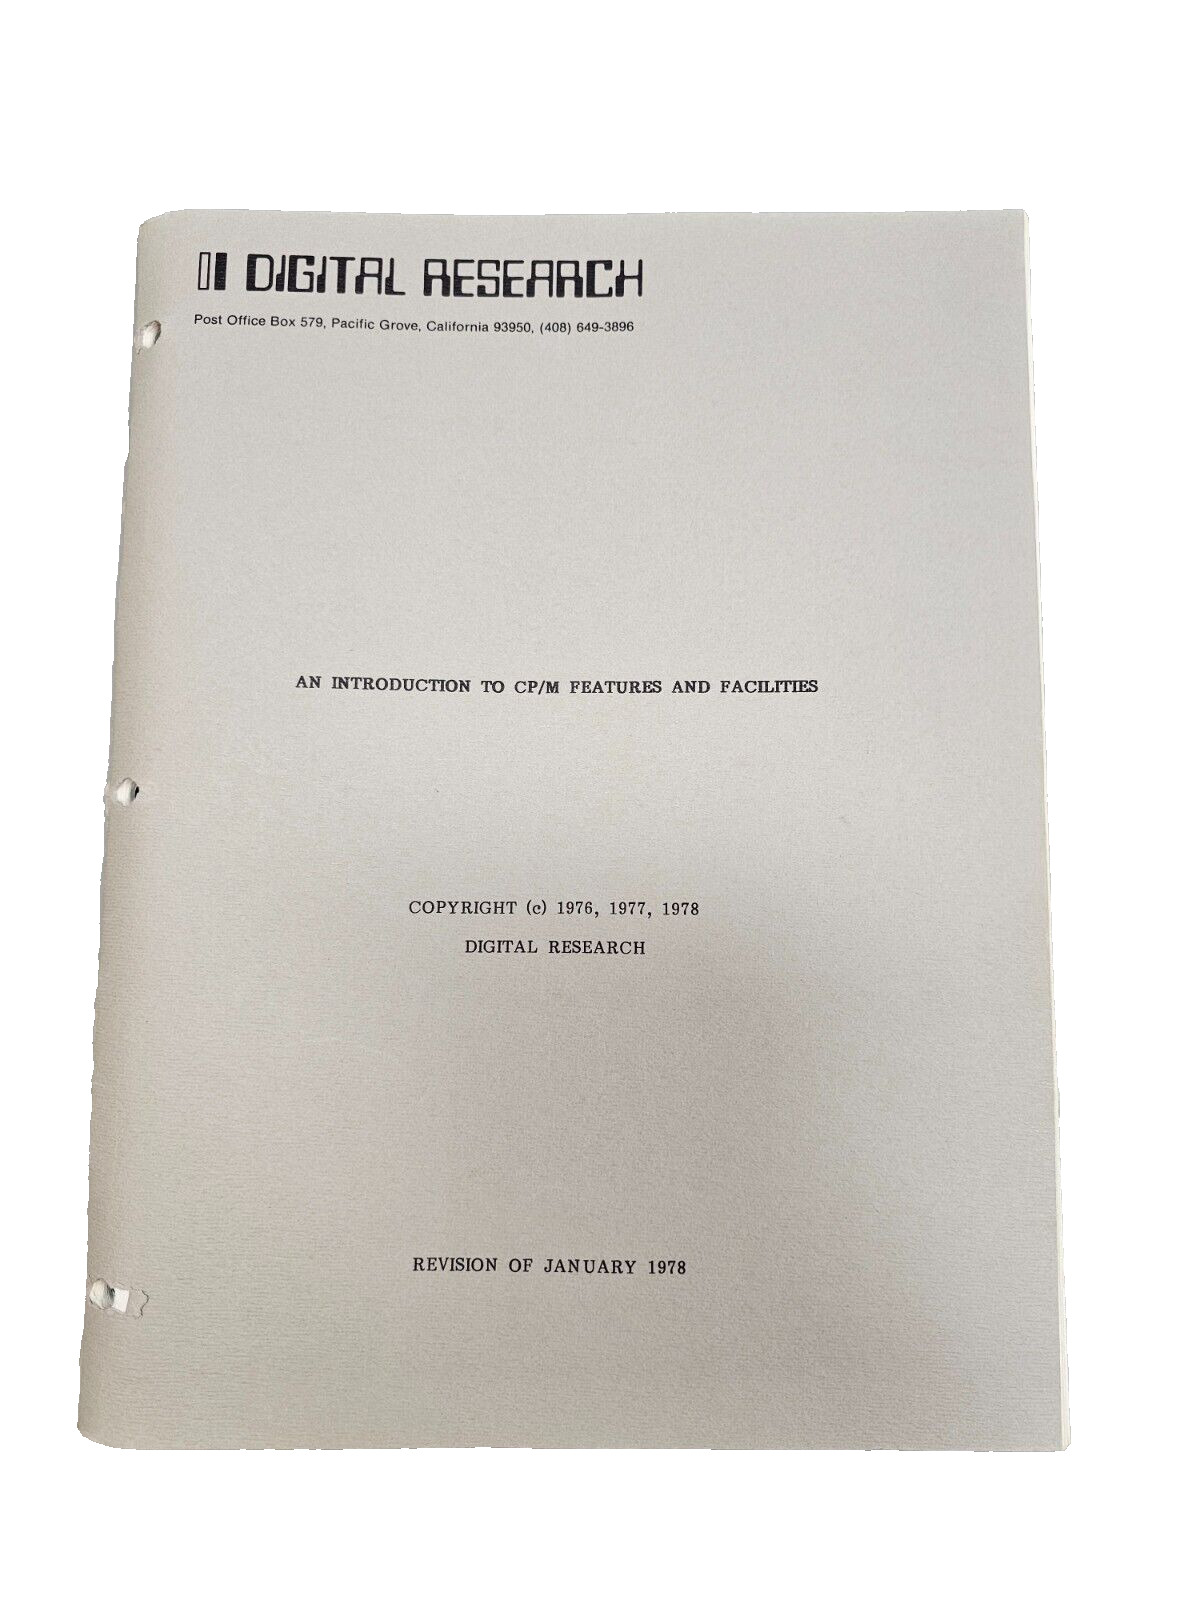 Vintage 1978 Digital Research An Introduction To CP/M Features And Facilities